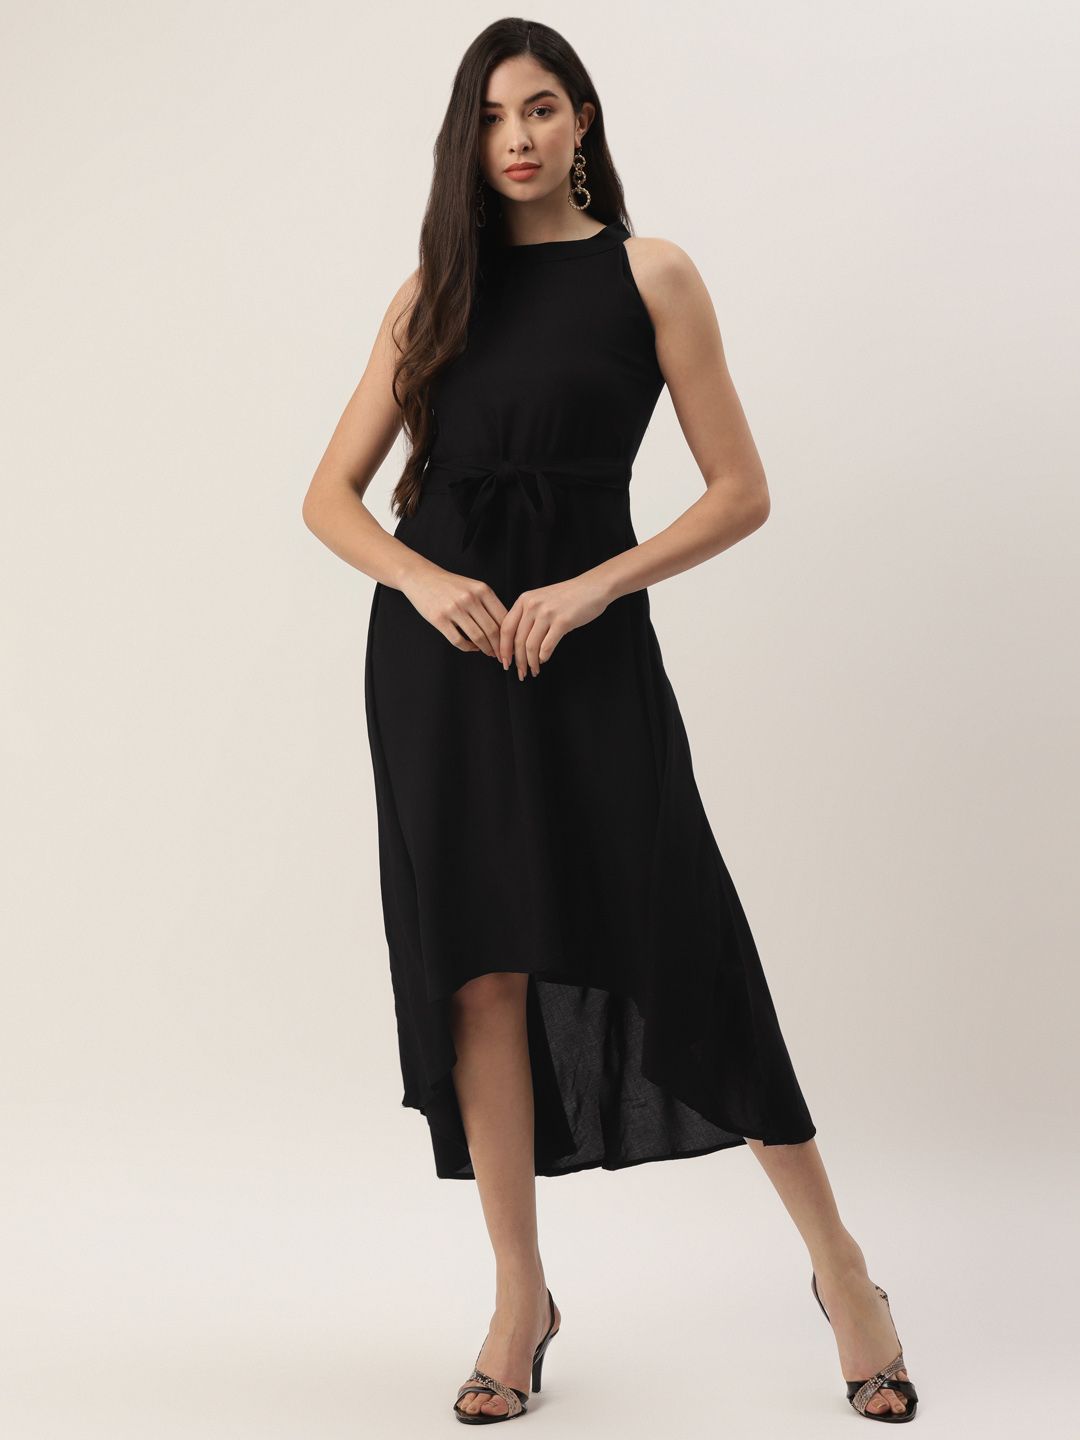 VAABA Black Solid High-Low A-Line Dress Price in India